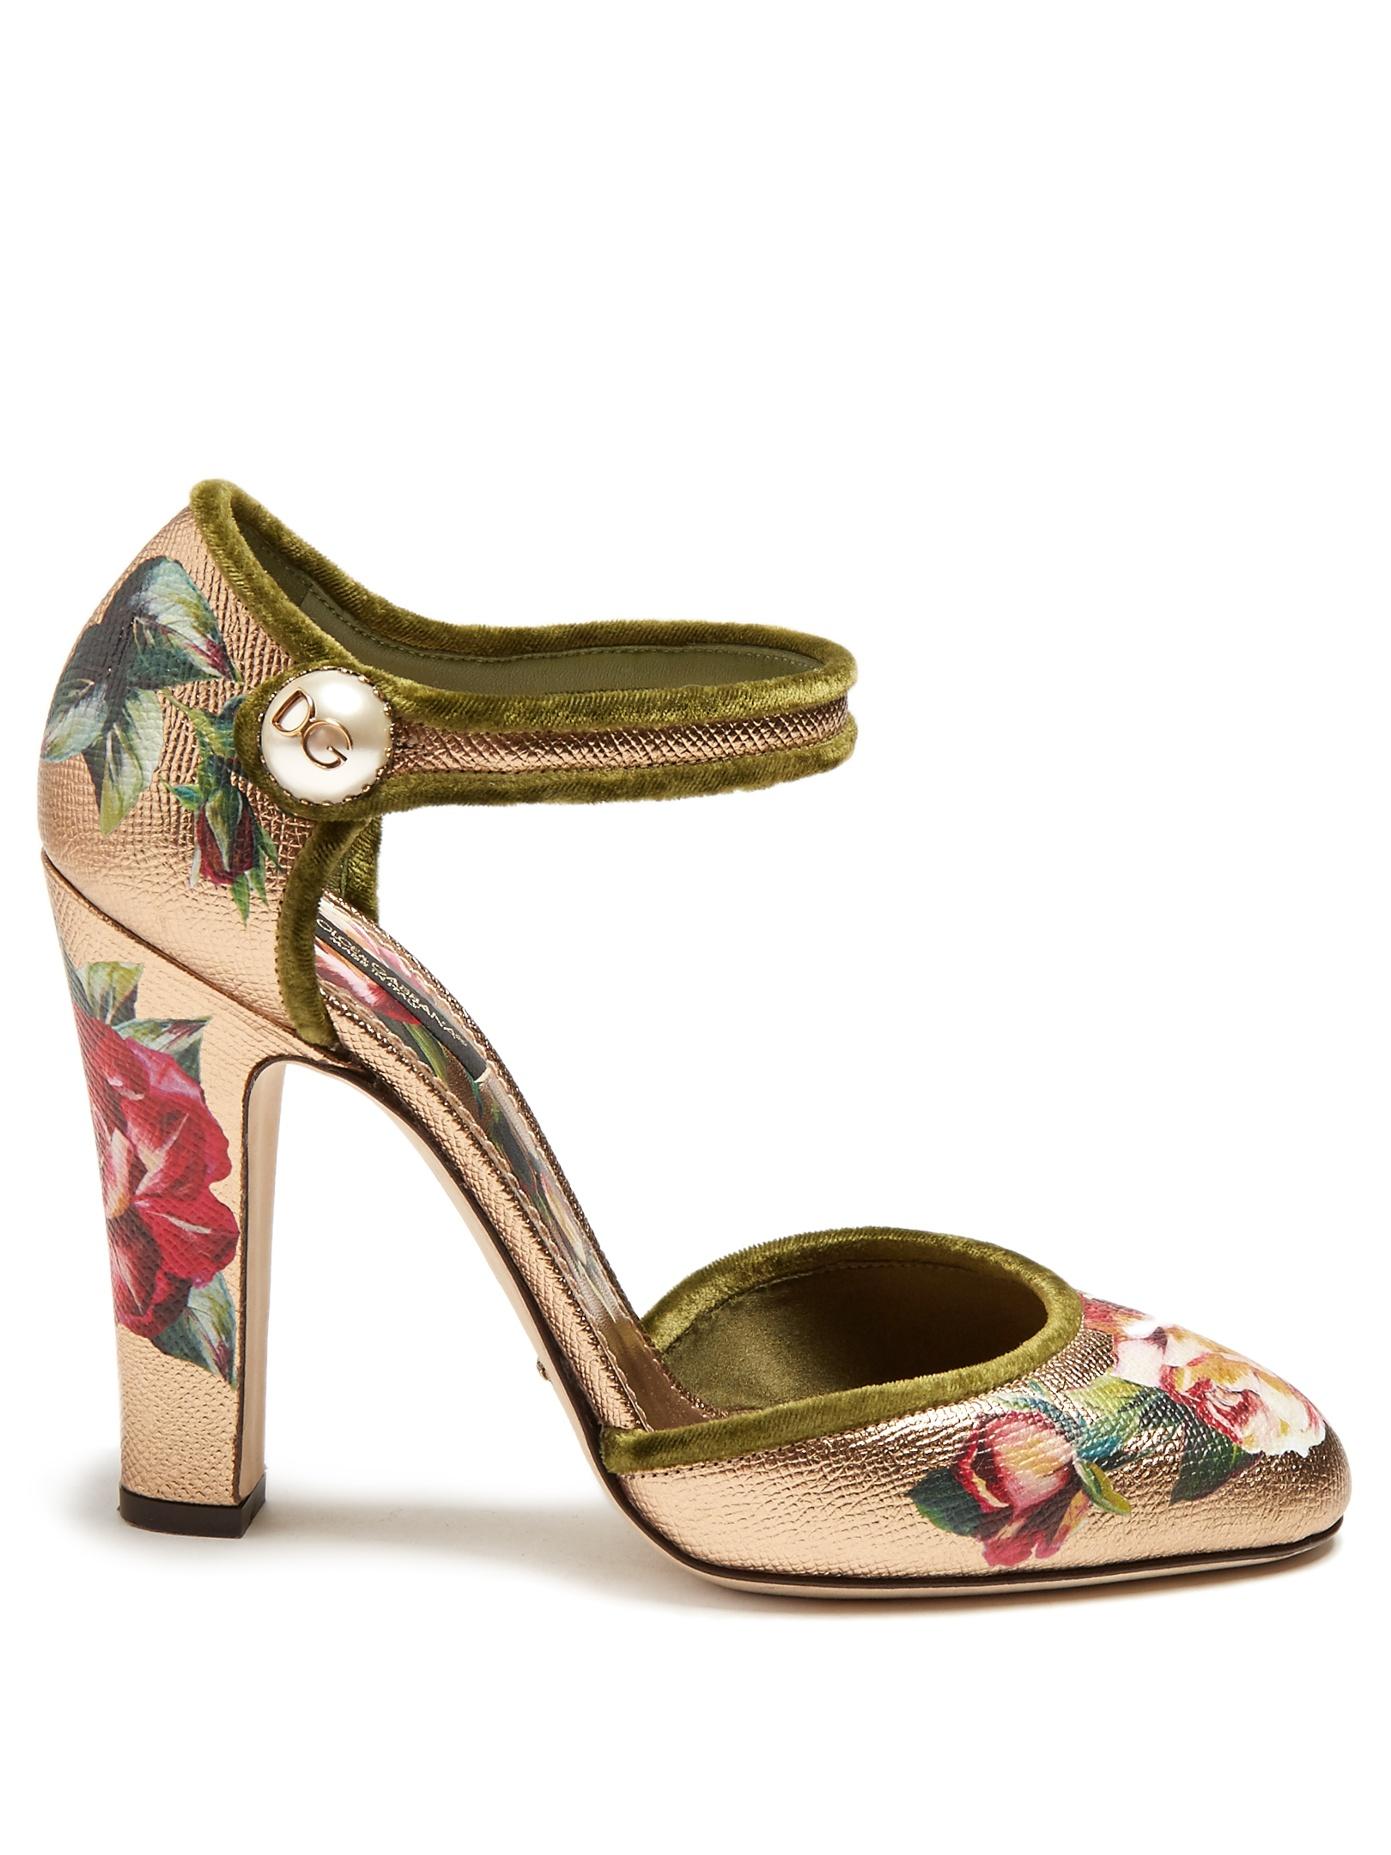 Dolce & Gabbana Floral-print Leather Pumps In Multi | ModeSens